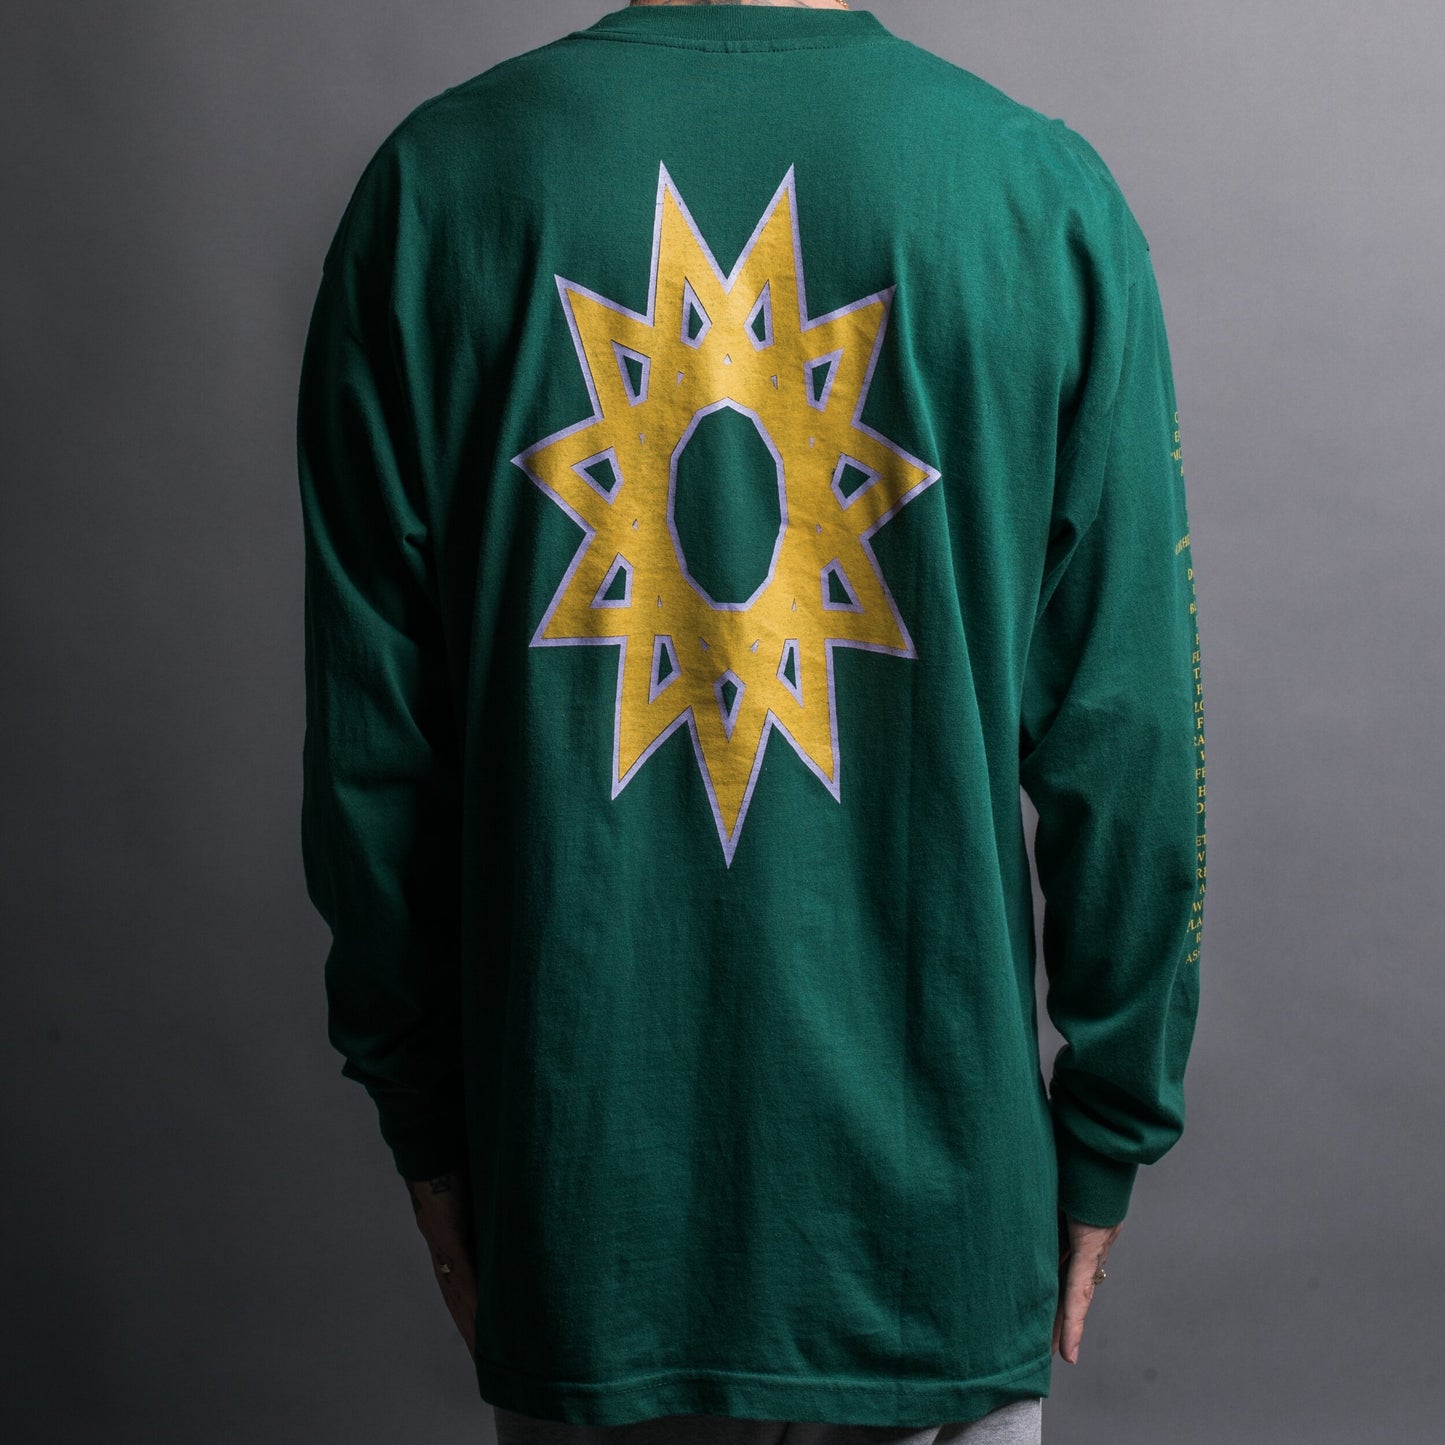 Vintage 90’s Into Another Mother Earth Longsleeve